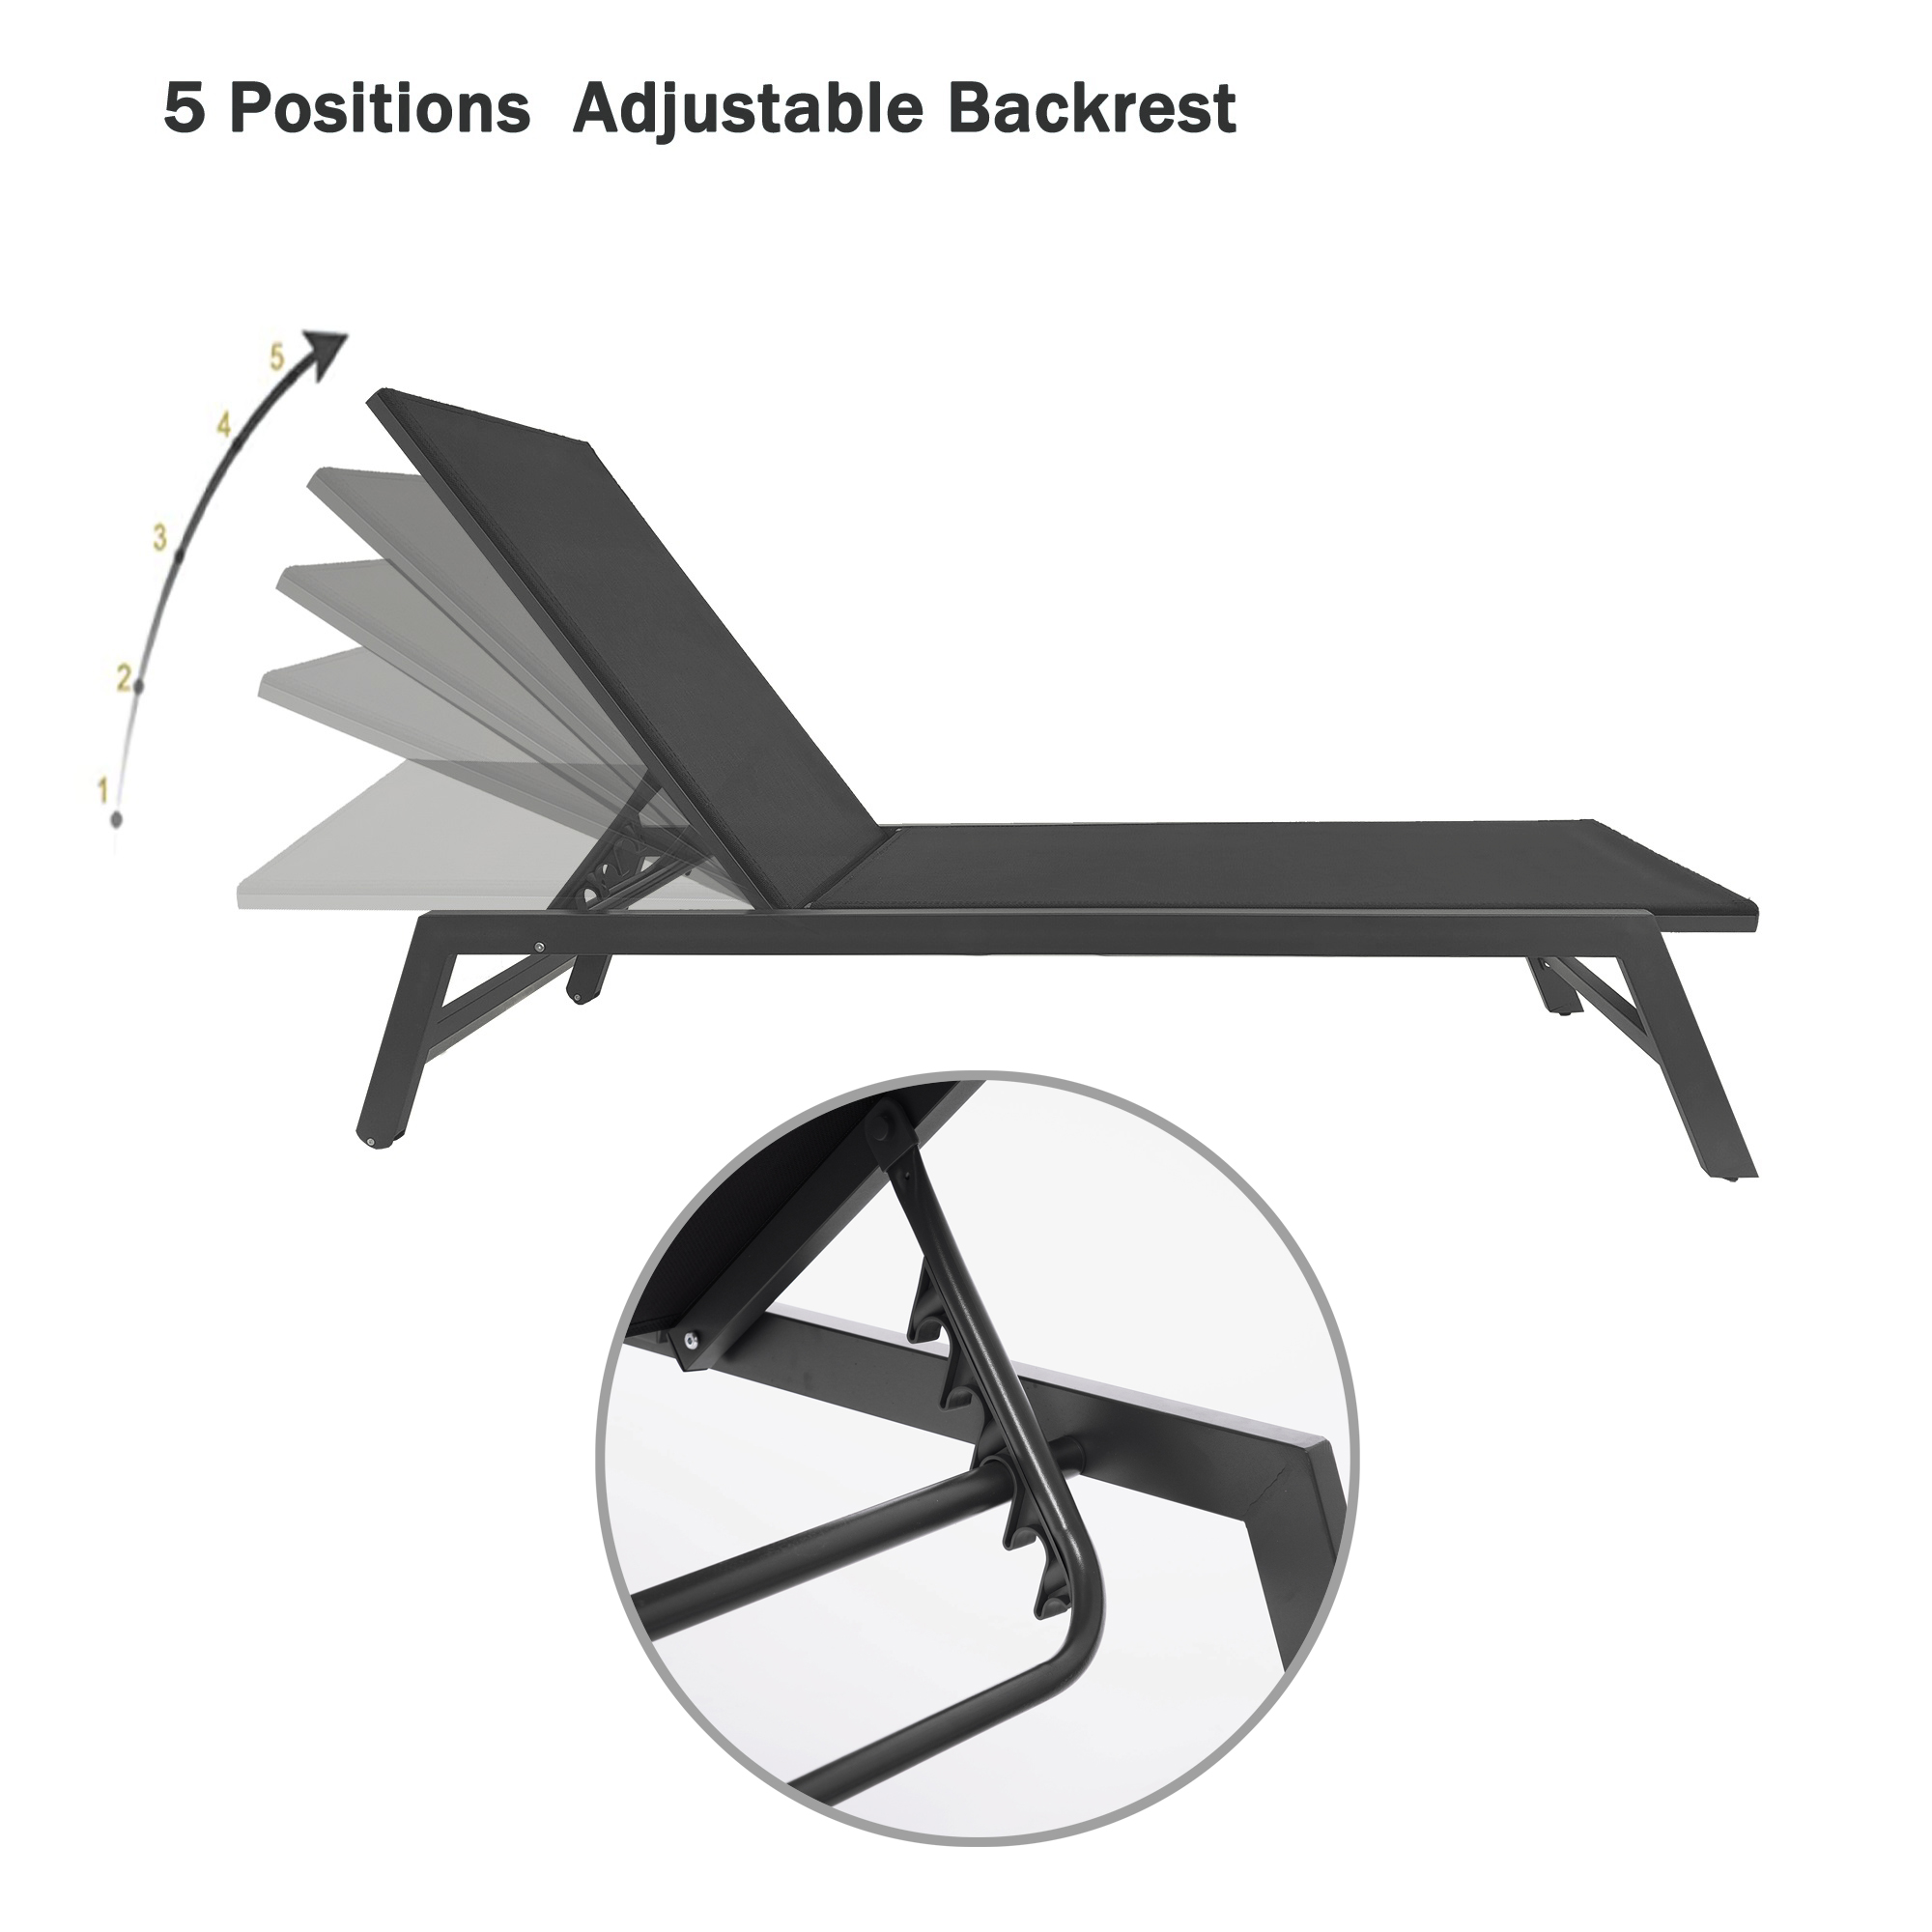 Outdoor Chaise Lounge Chair with Wheels, Five-Position Adjustable Aluminum Patio Lounge Chair Set, Sunbathing Reclining Chair for Beach, Yard, Patio, Pool, Home Office Sitting Area, Black - image 3 of 7